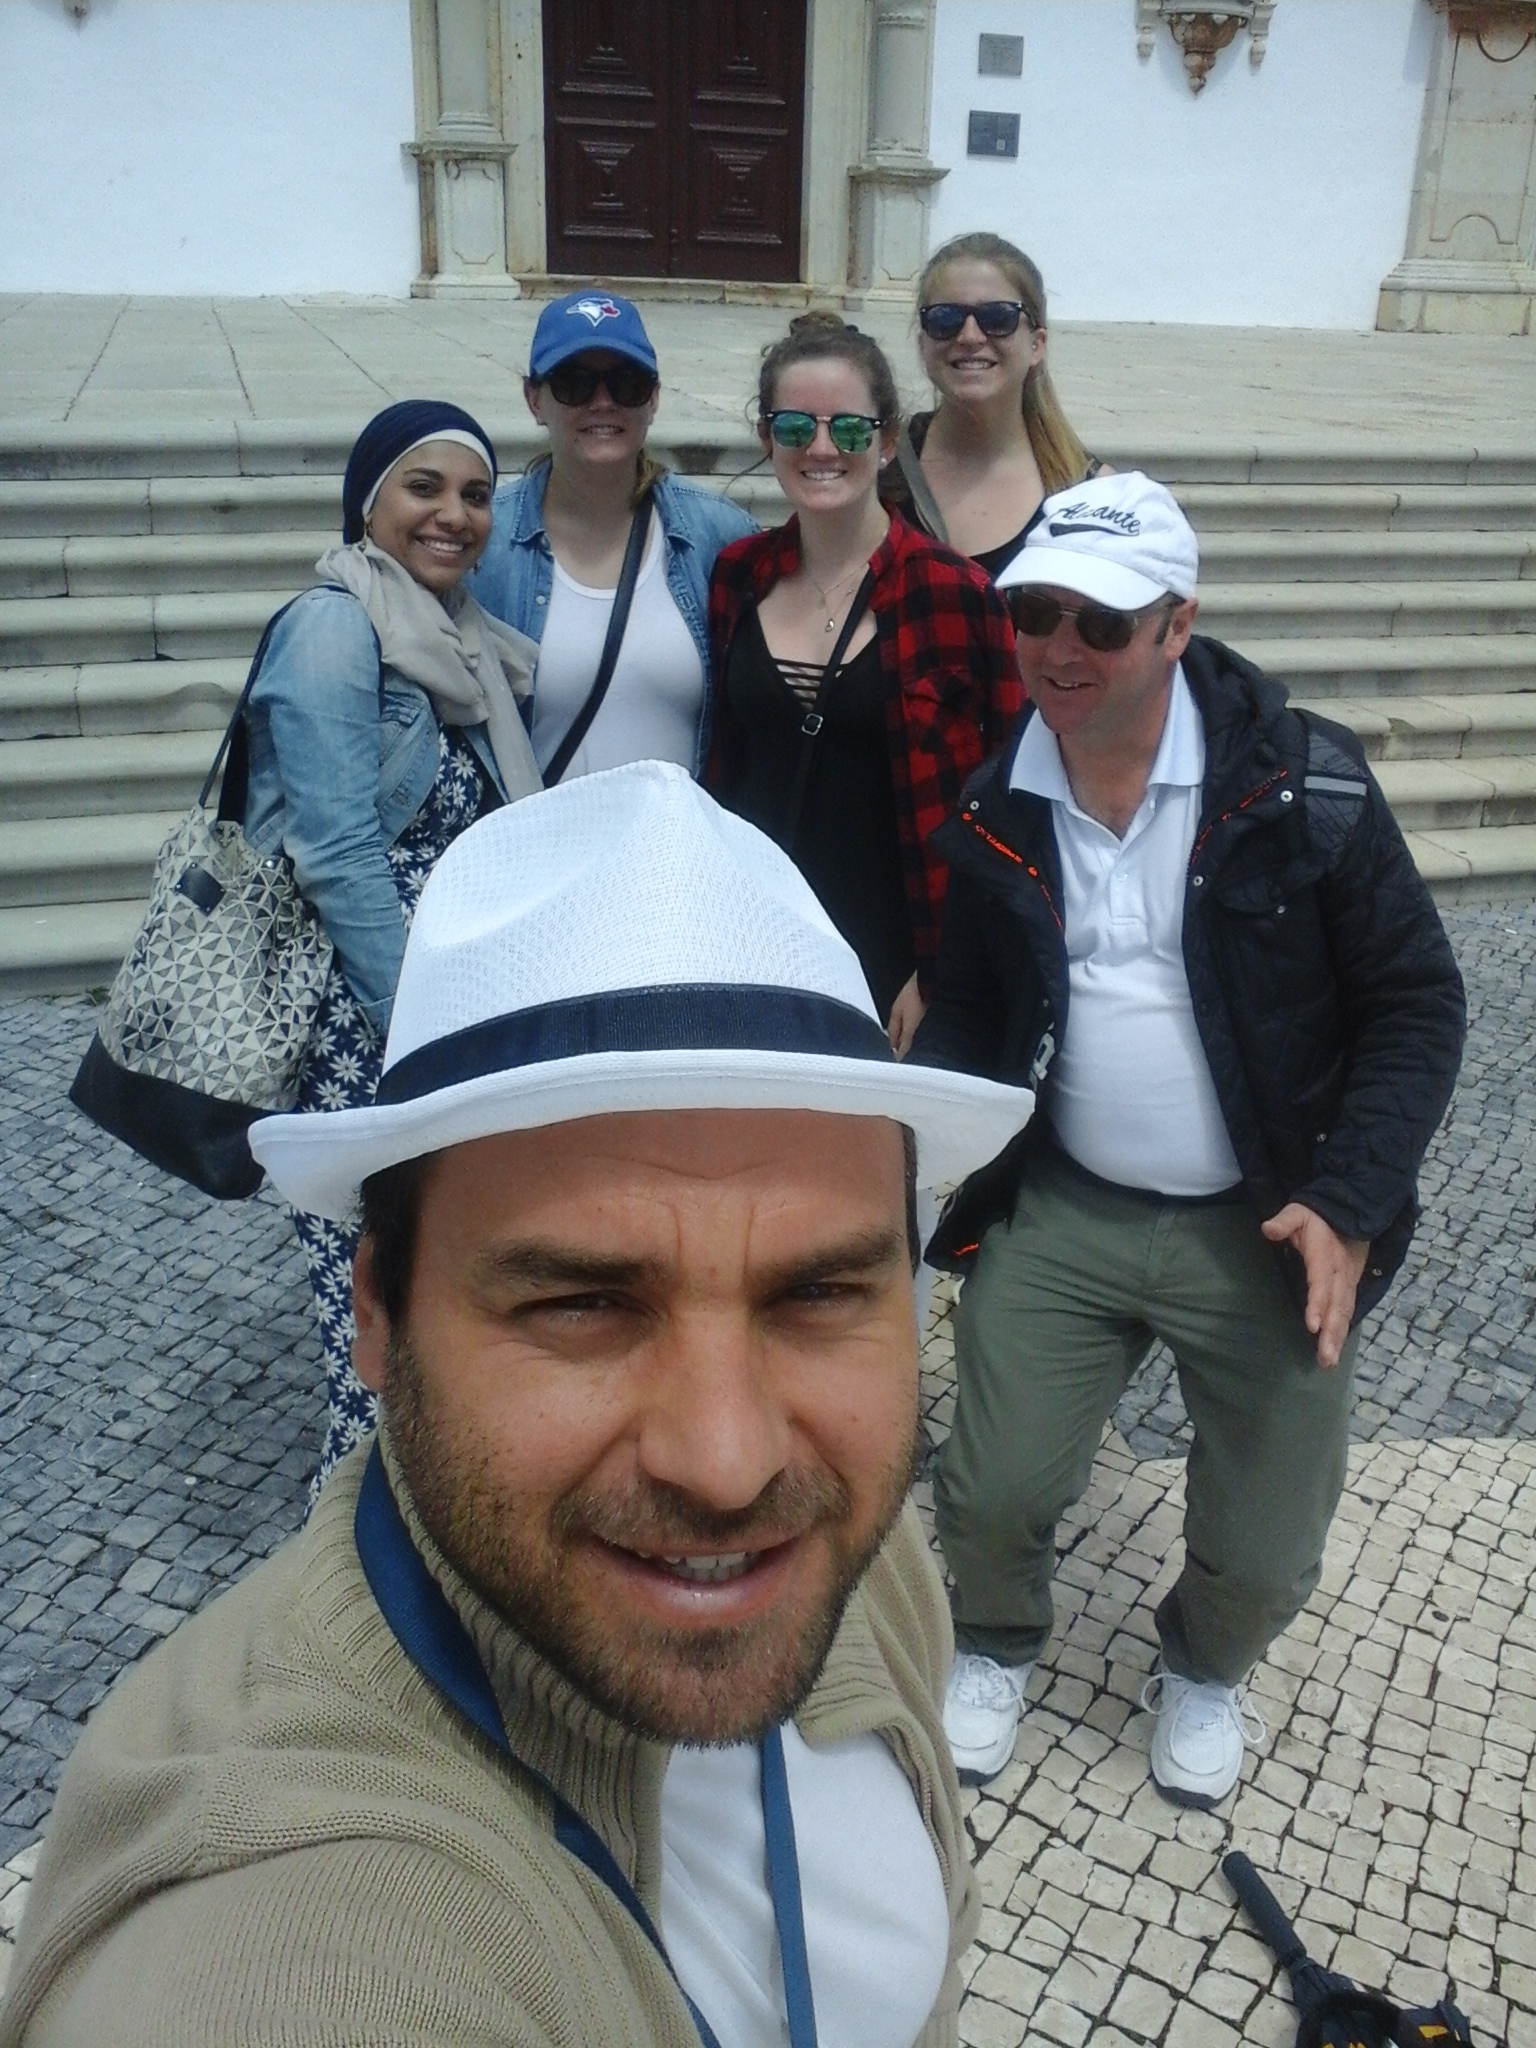 Group selfie with the walking tour